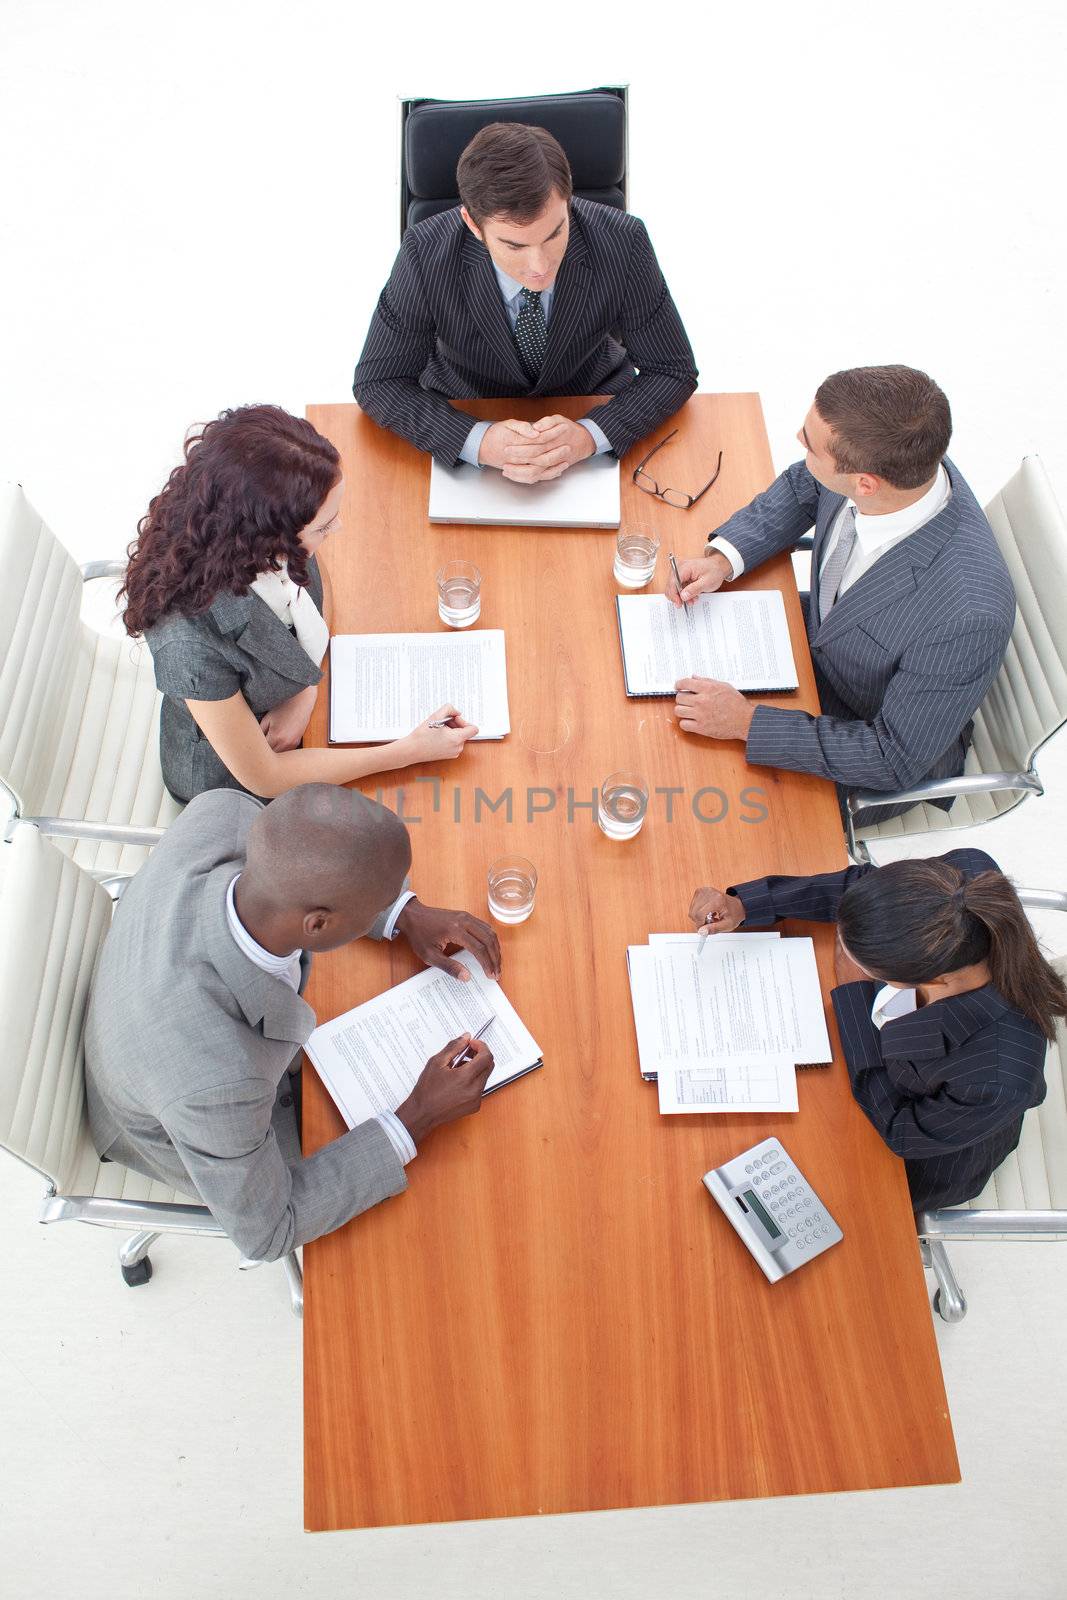 High Angle of multi-ethnic business people having a meeting